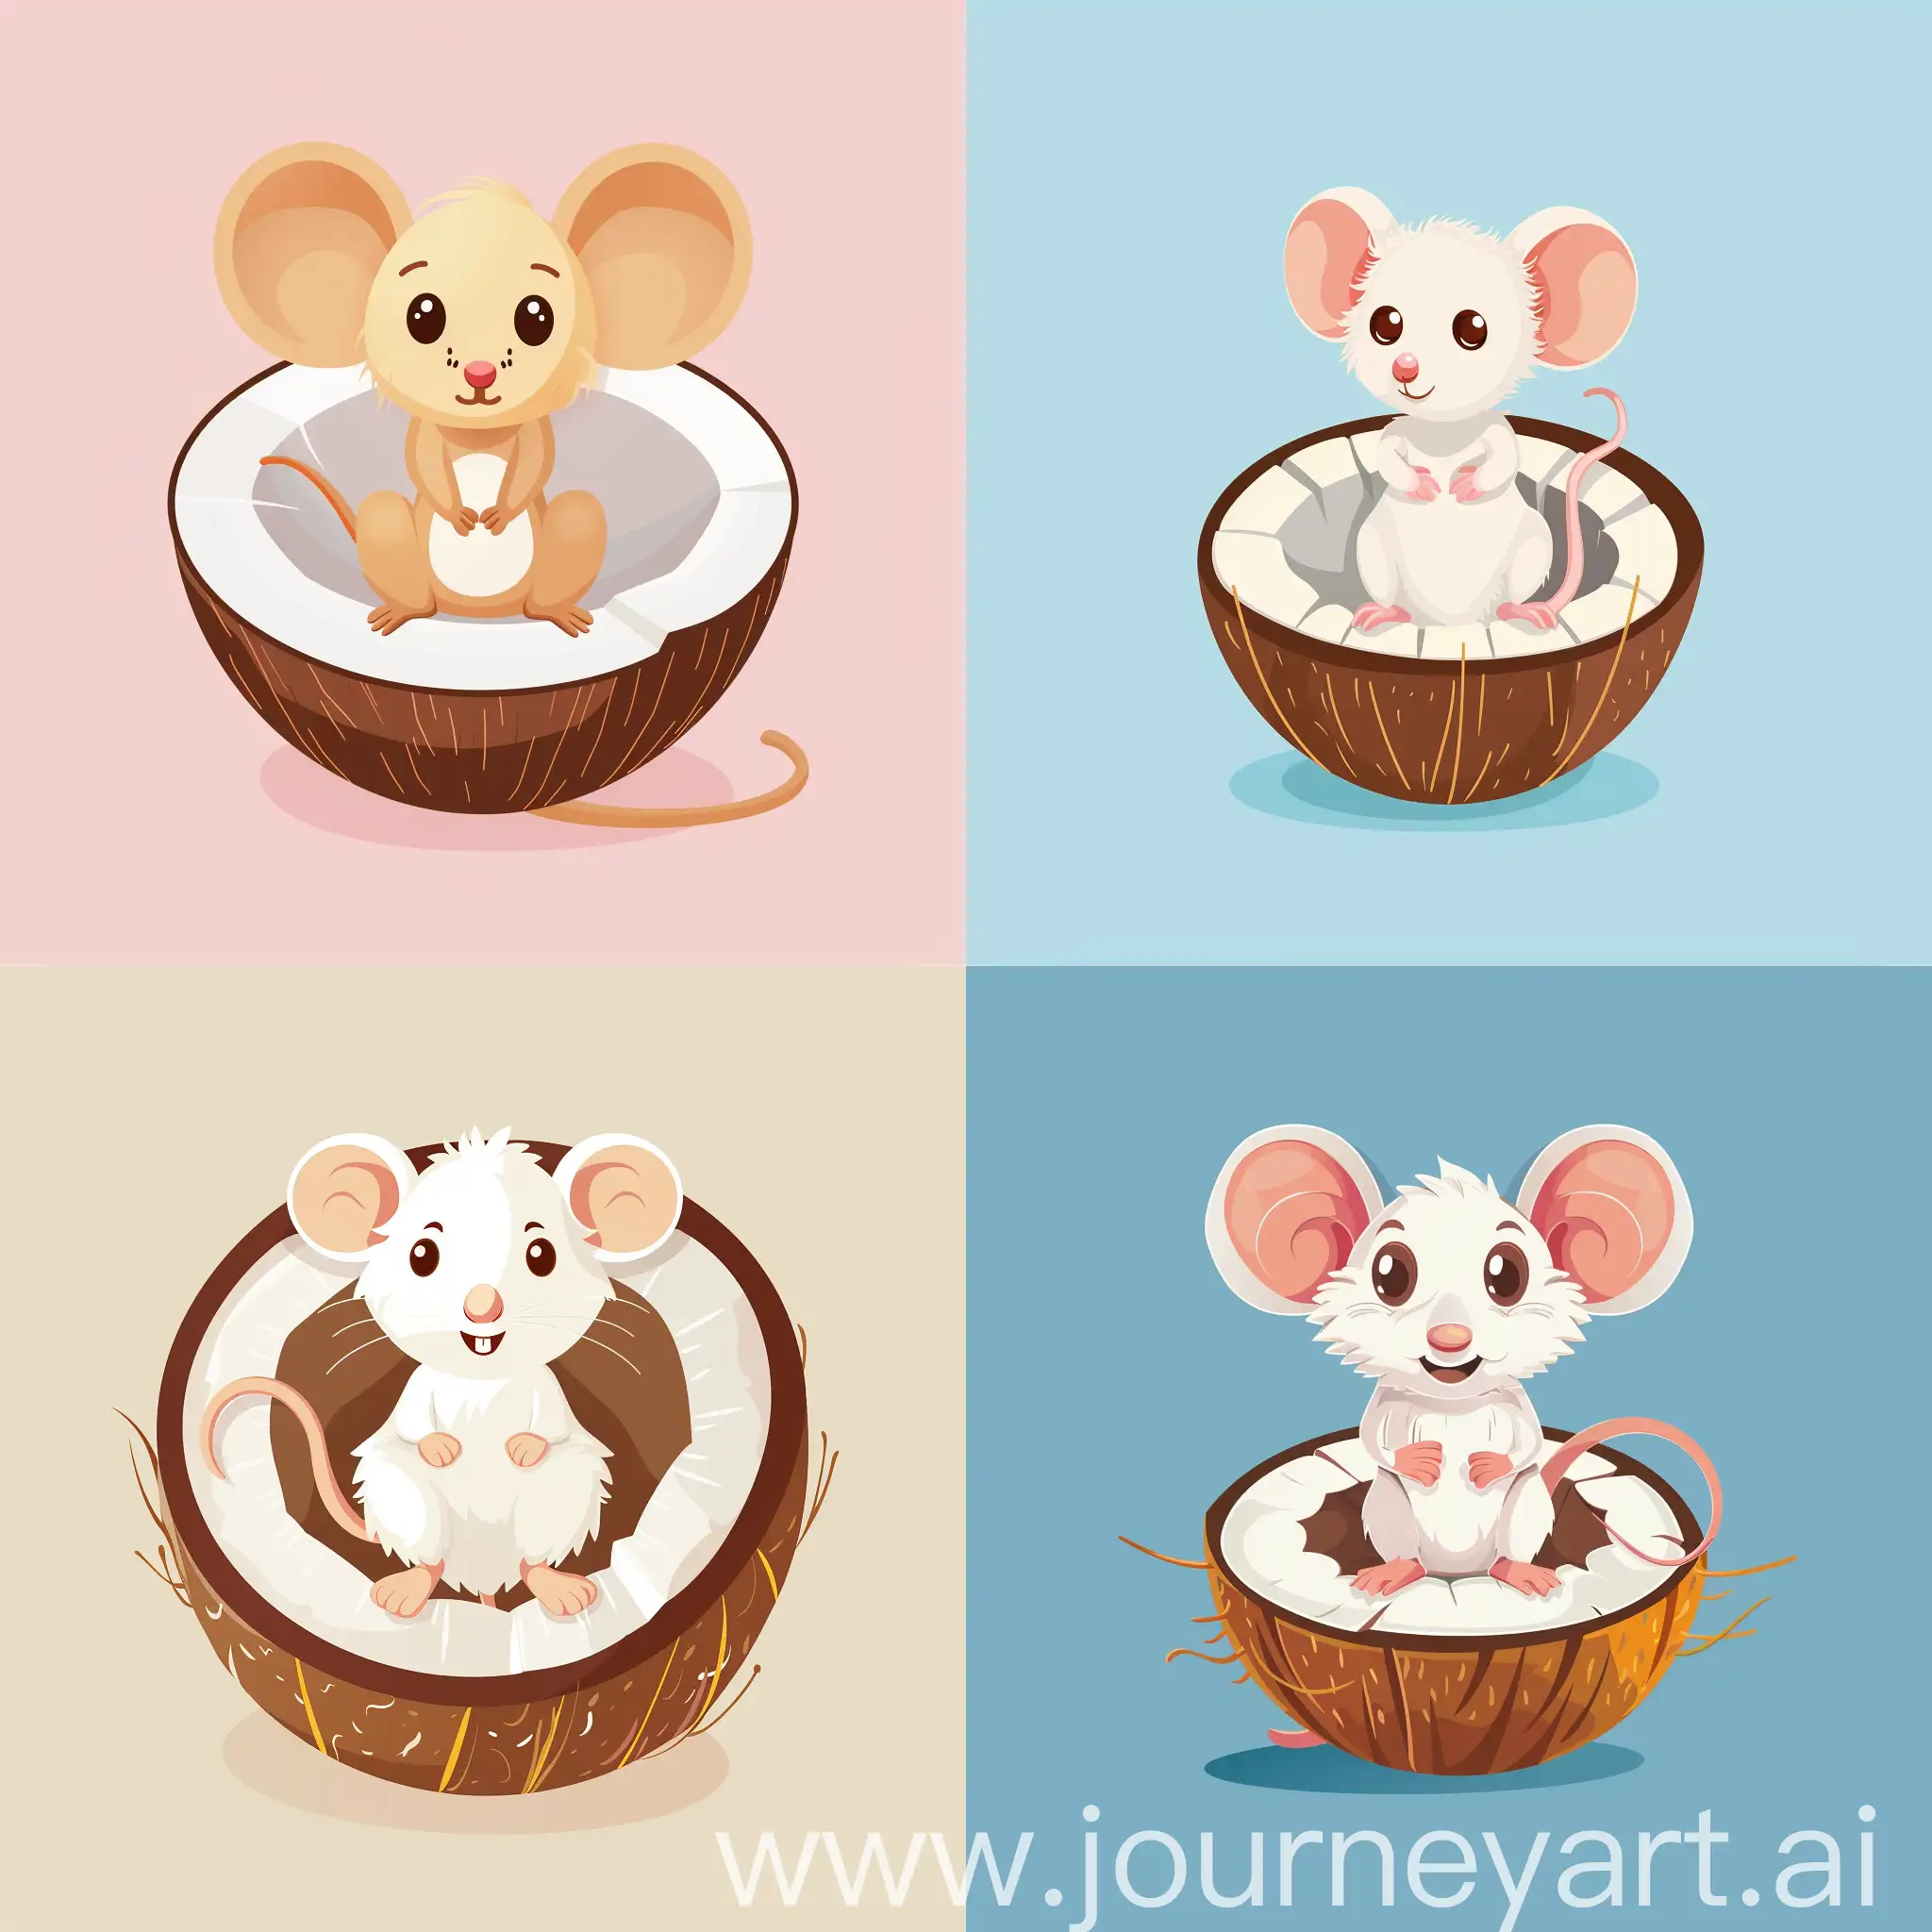 little cute mouse sitting in half of coconut, in cartoon flat style